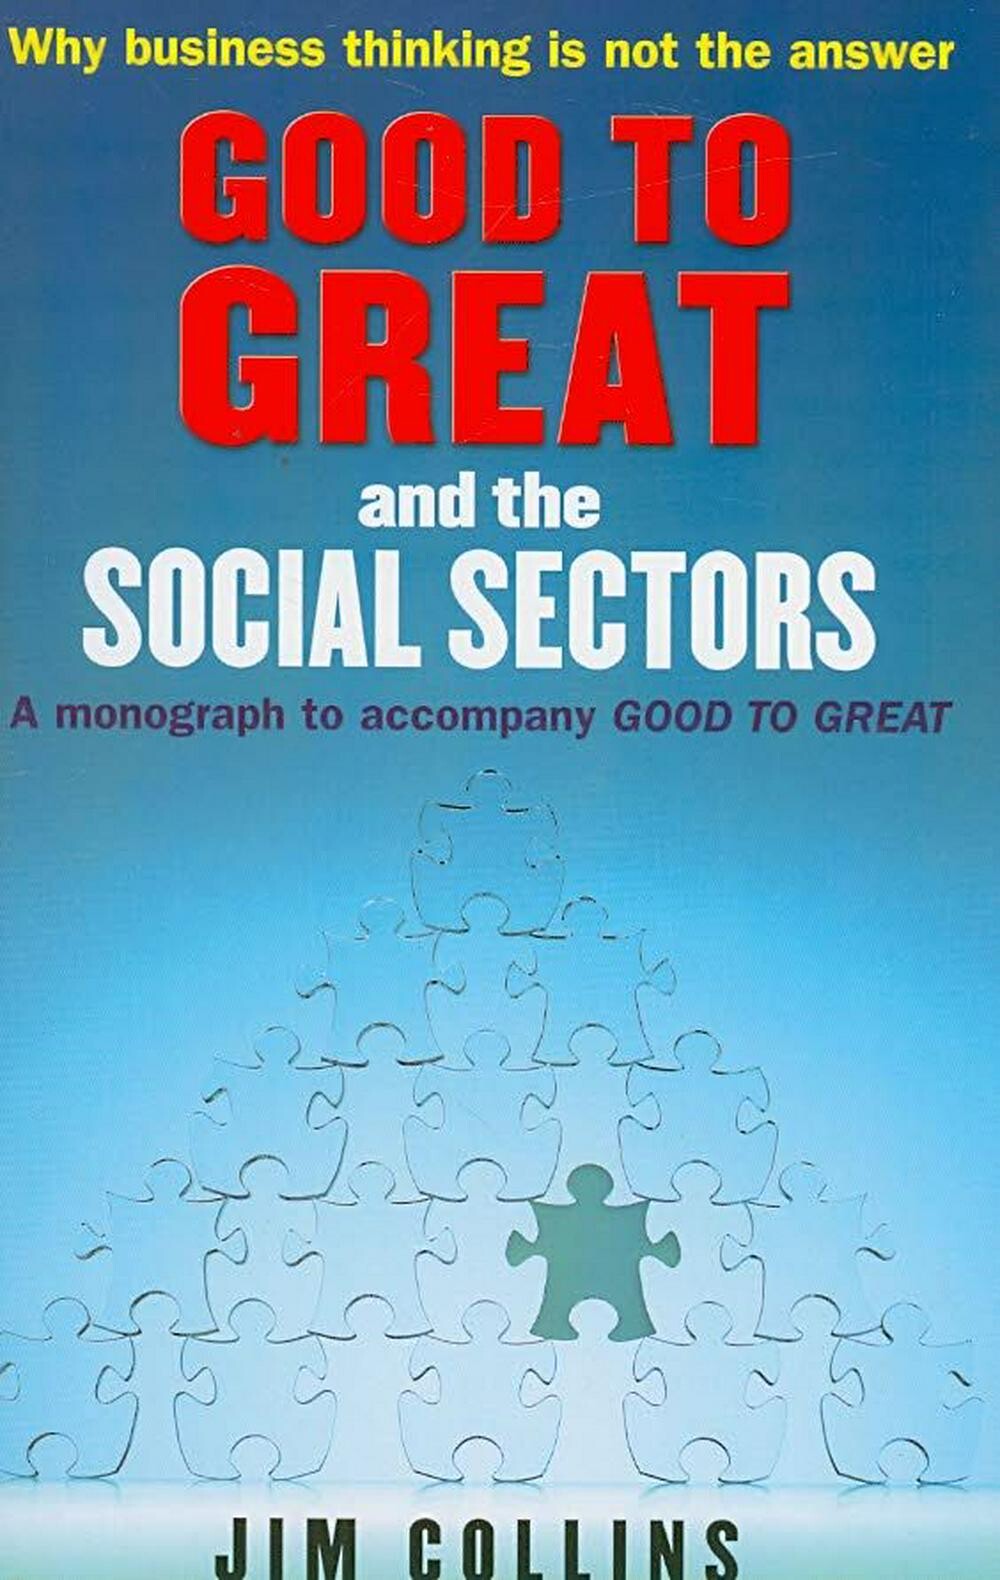 Good to Great and the Social Sectors - Vivat